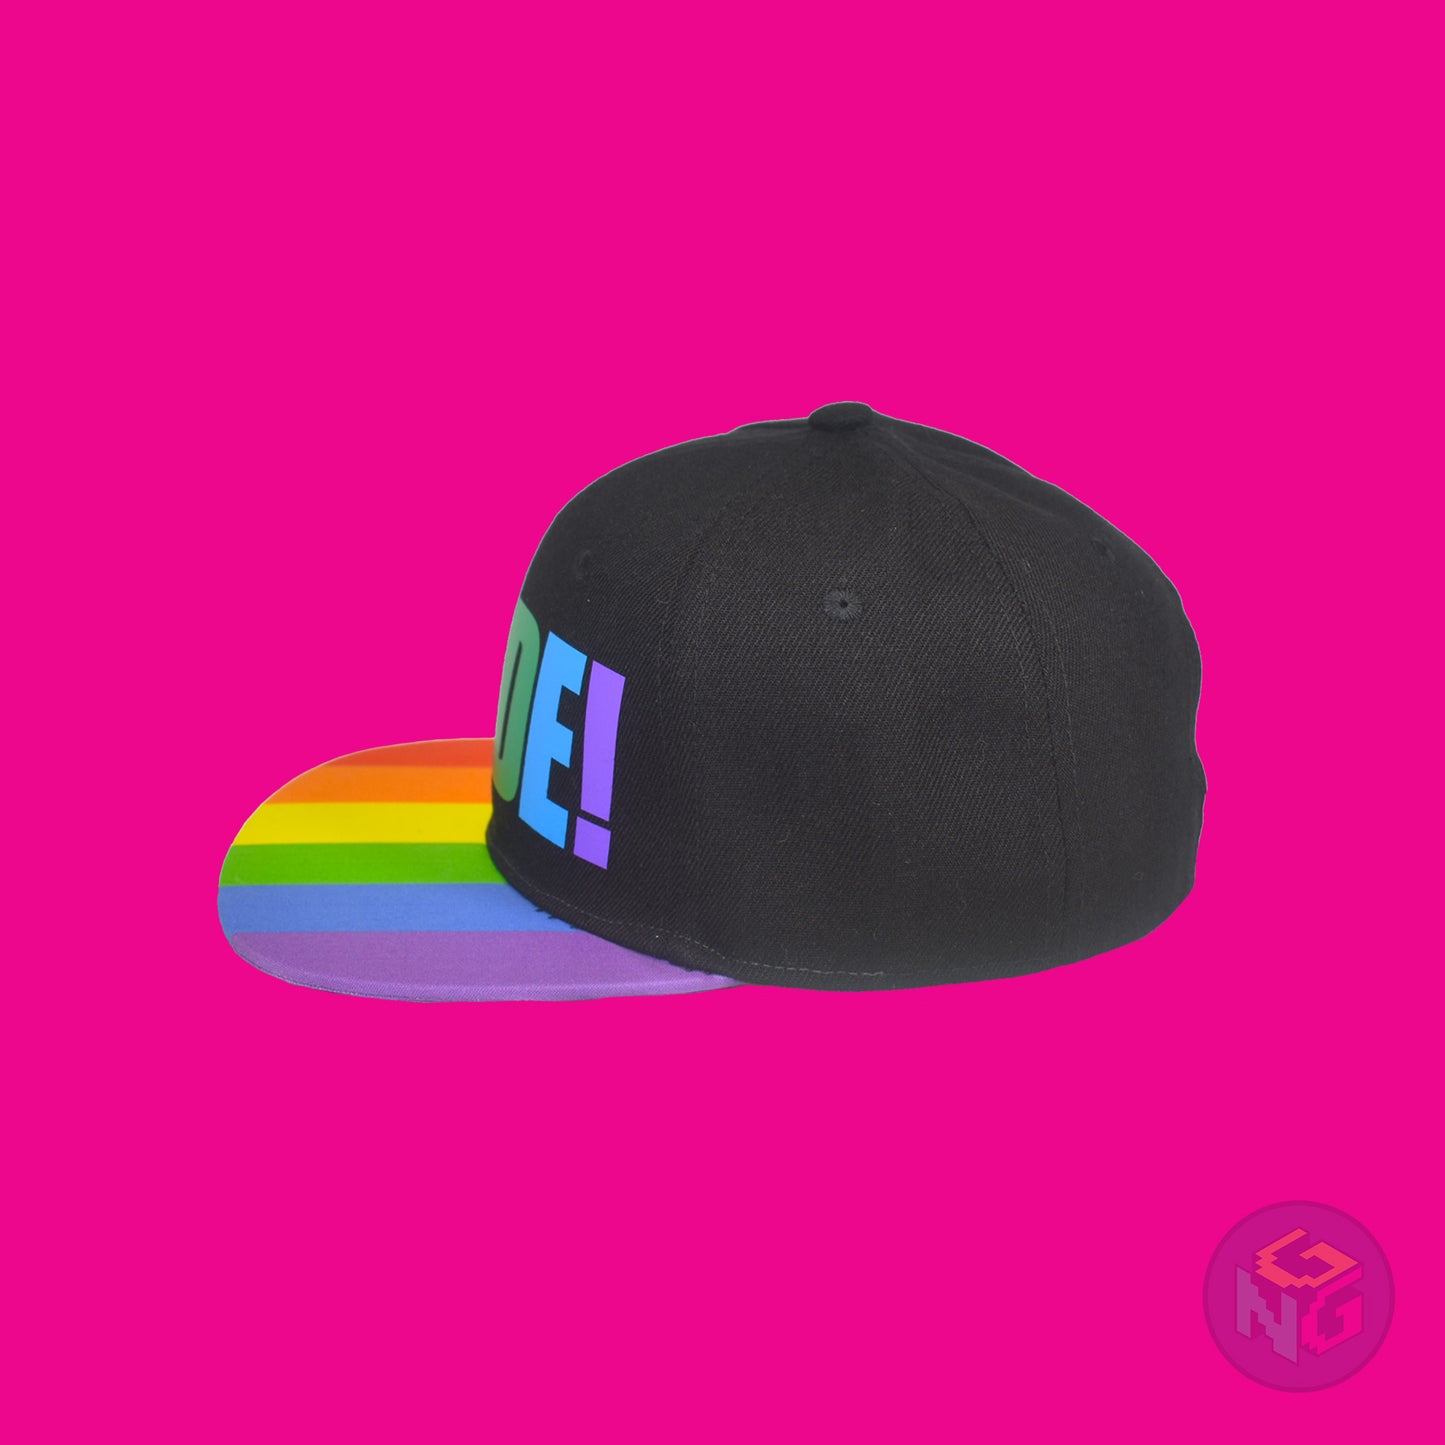 Black flat bill snapback hat. The brim has the rainbow pride flag on both sides and the front of the hat has the word “PRIDE!” in rainbow letters. Left view